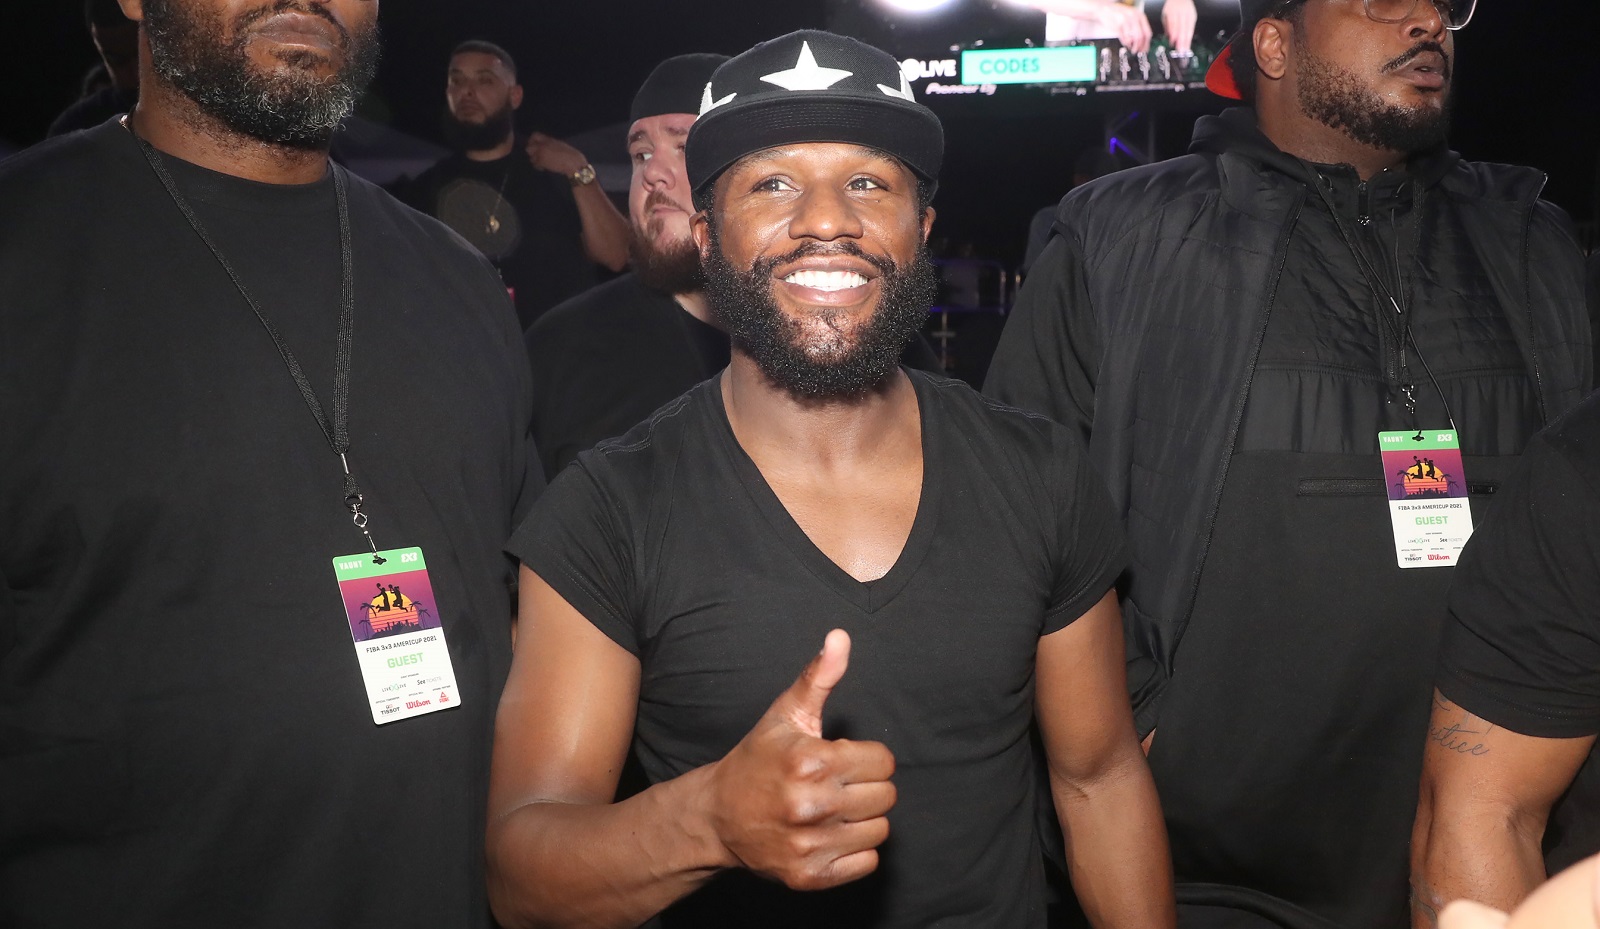 Floyd Mayweather attends 2021 Ballerfest: Music Lives at Bayfront Park on Nov. 13, 2021, in Miami, Florida.